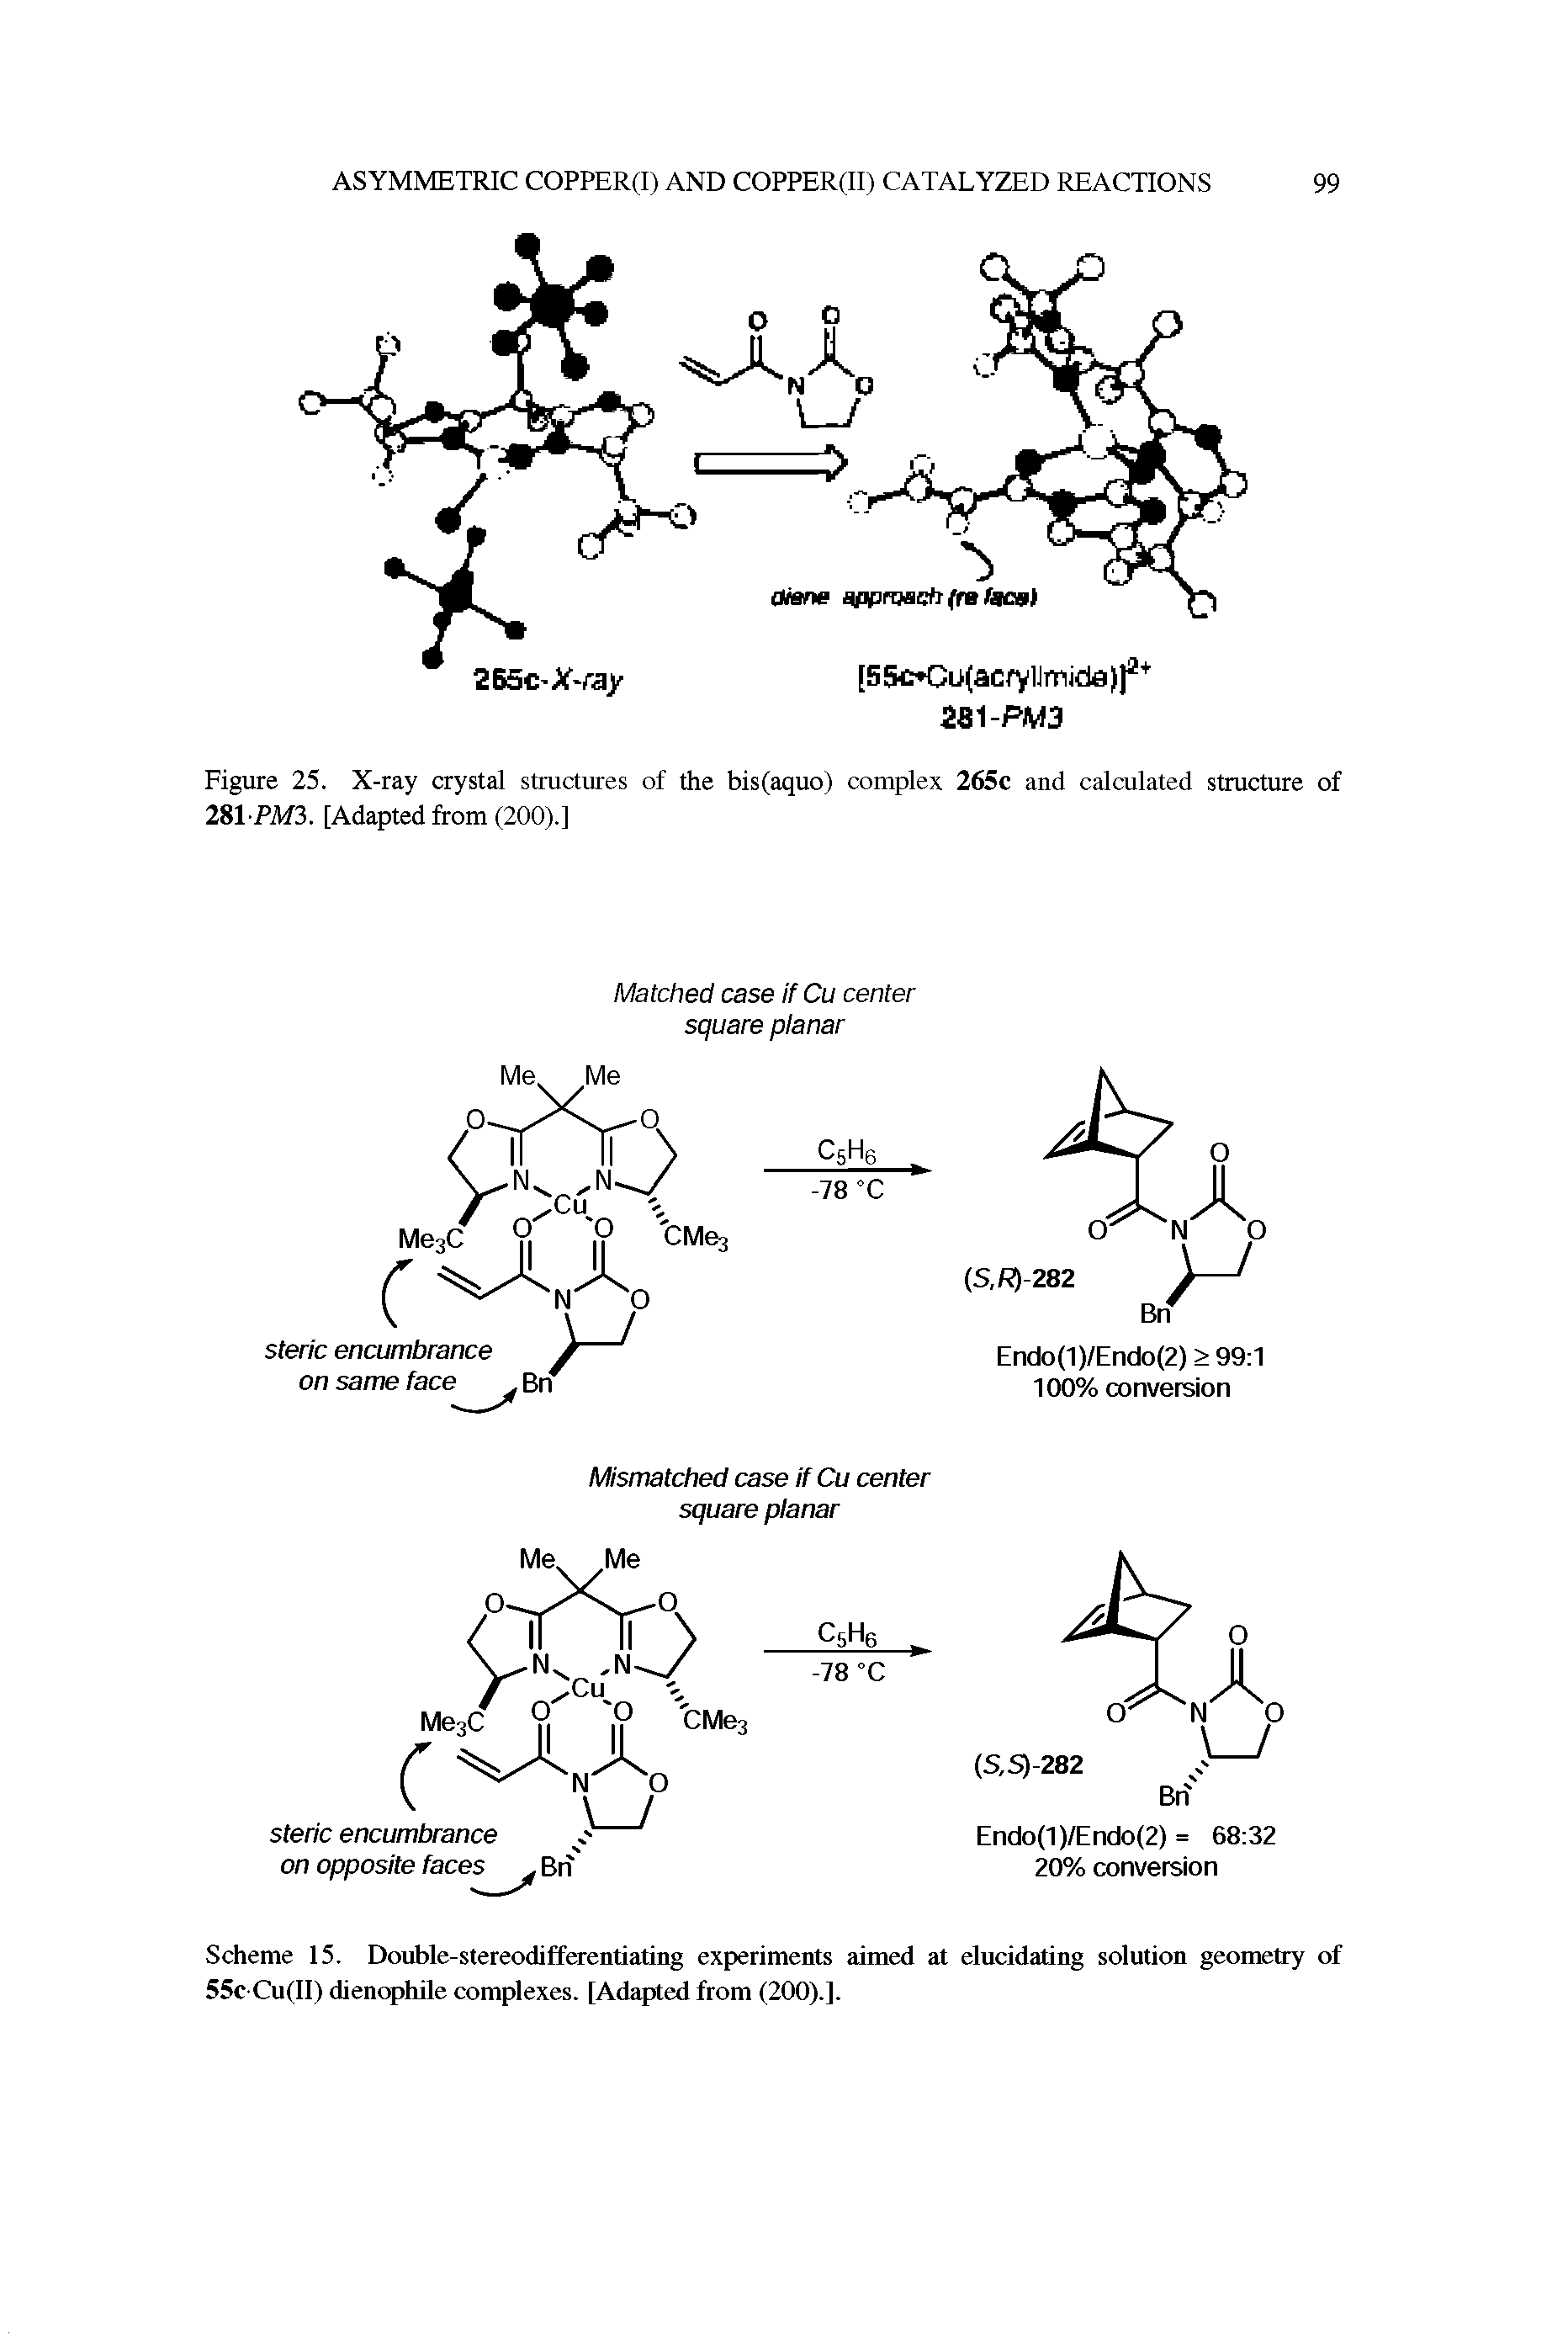 Scheme 15. Double-stereodifferentiating experiments aimed at elucidating solution geometry of 55c Cu(II) dienophile complexes. [Adapted from (200).].